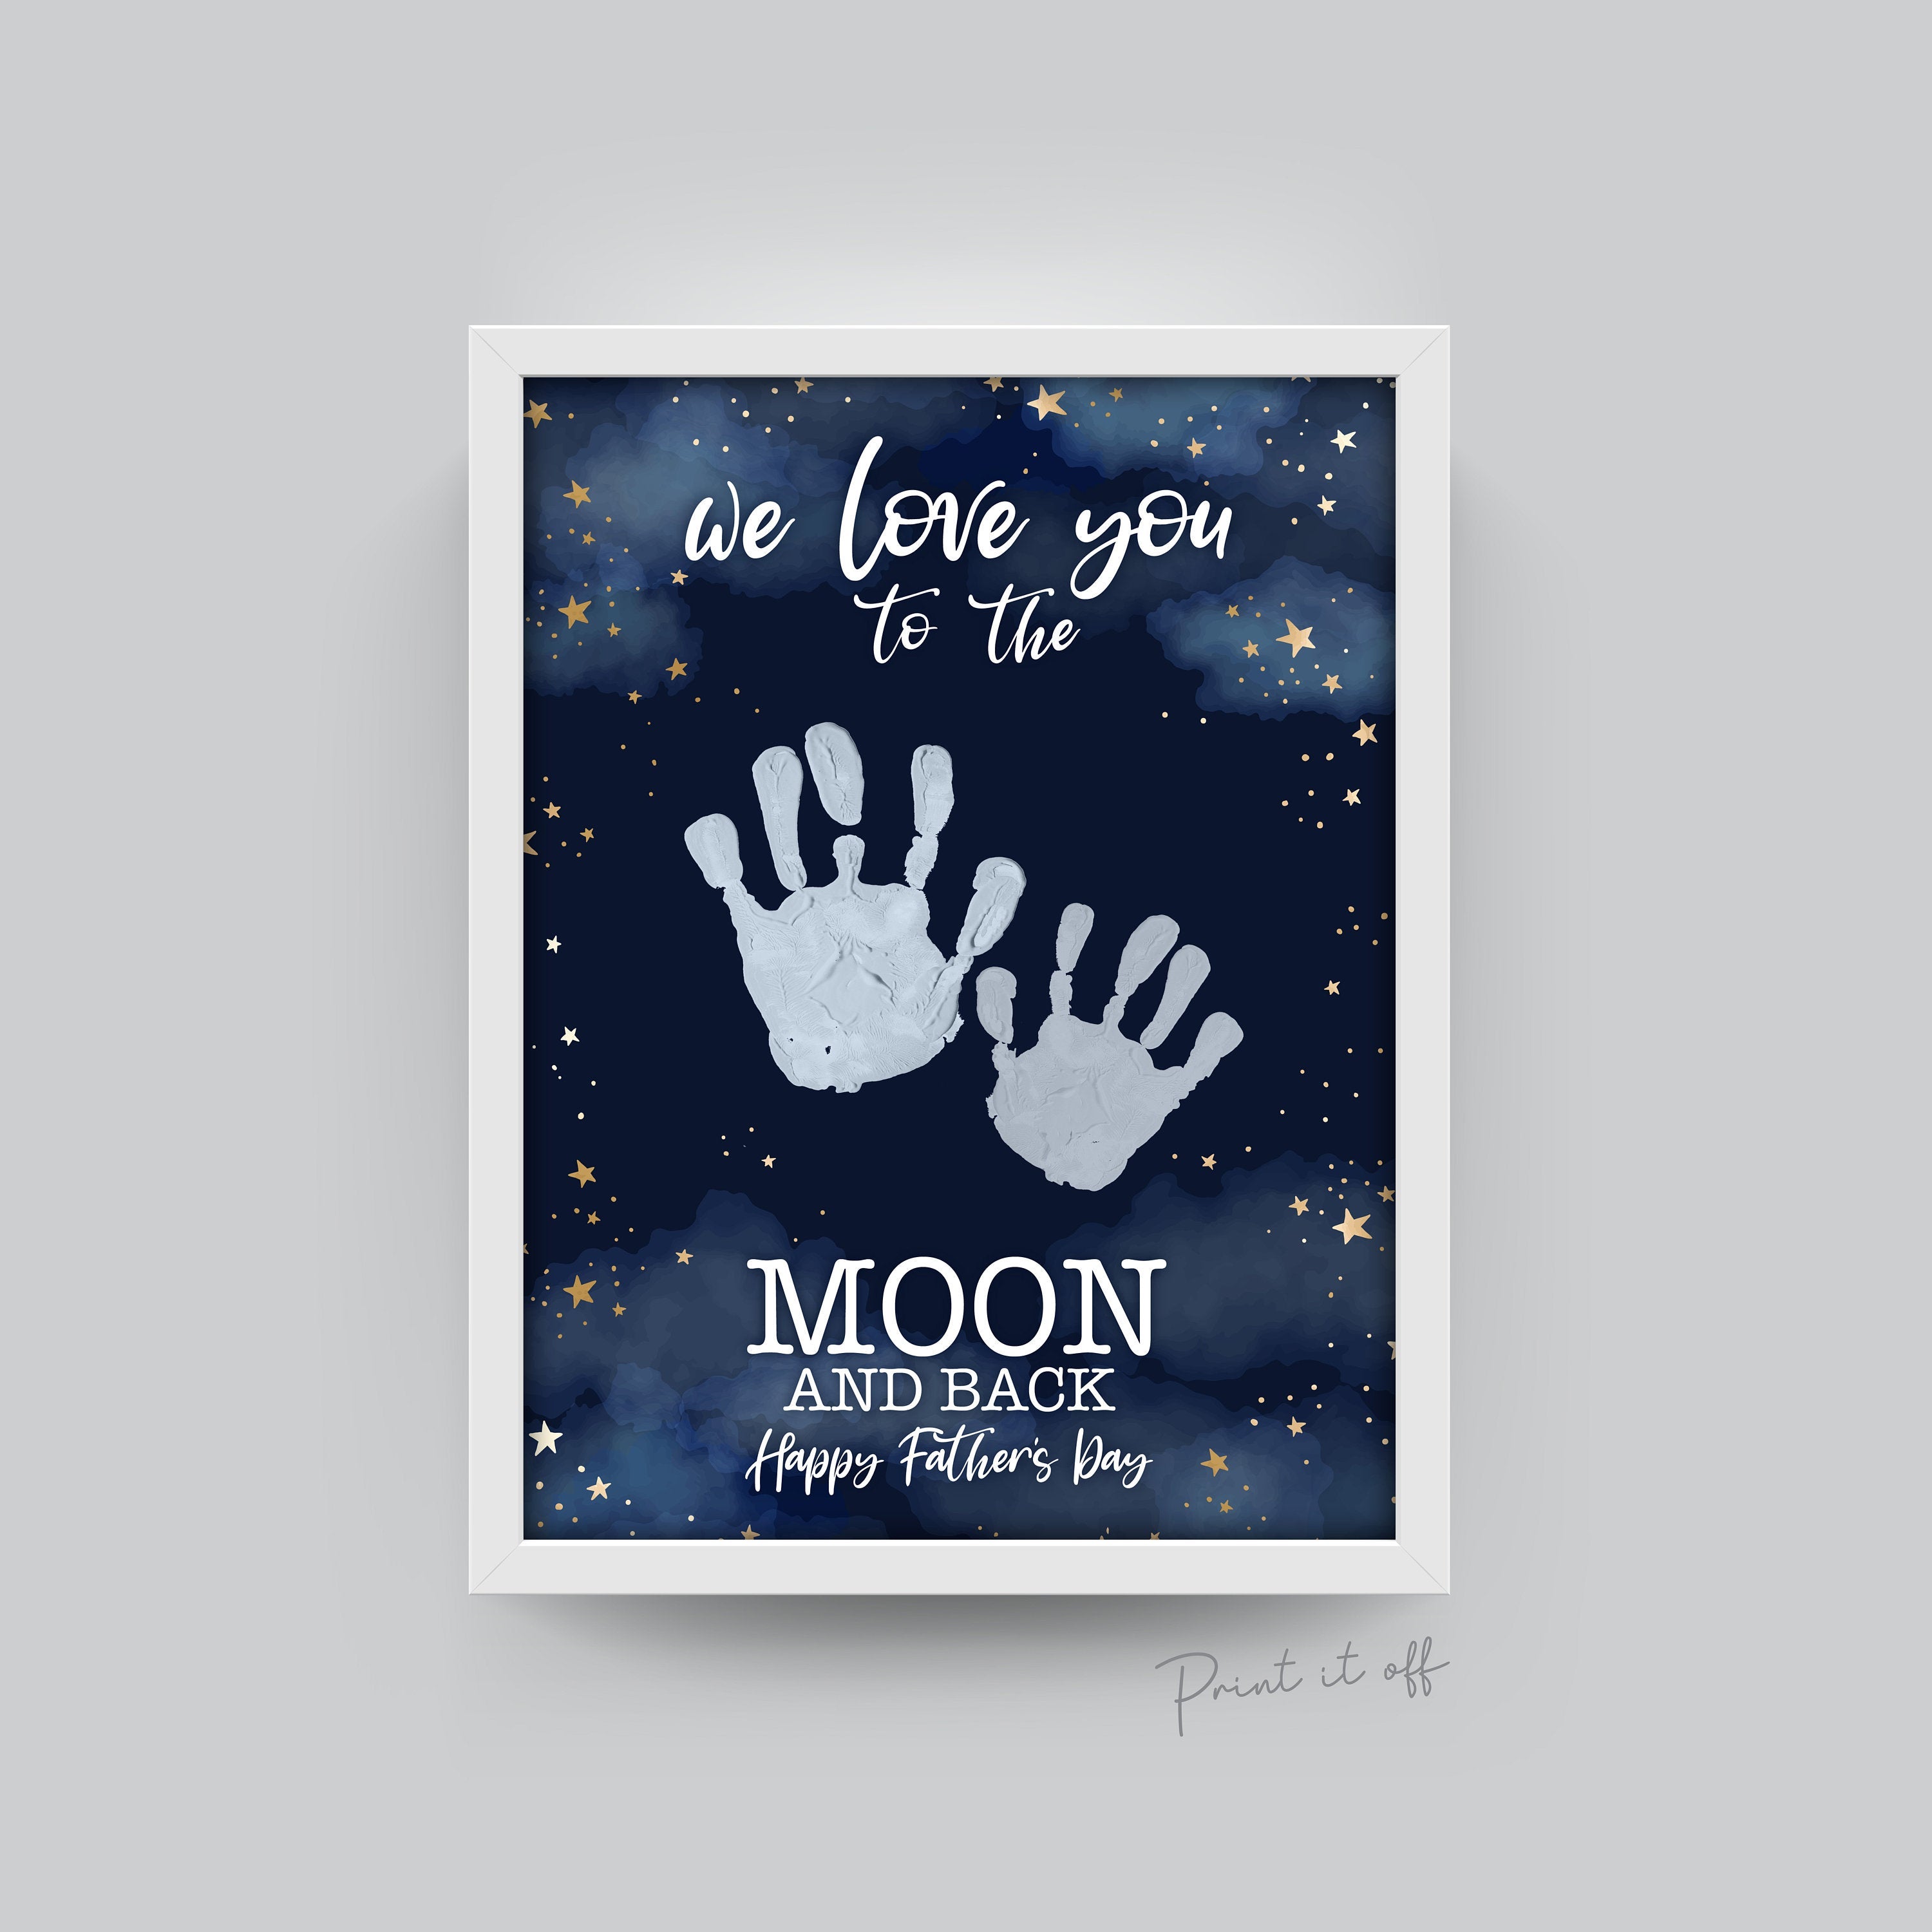 I Love You to the Moon and Back Poster